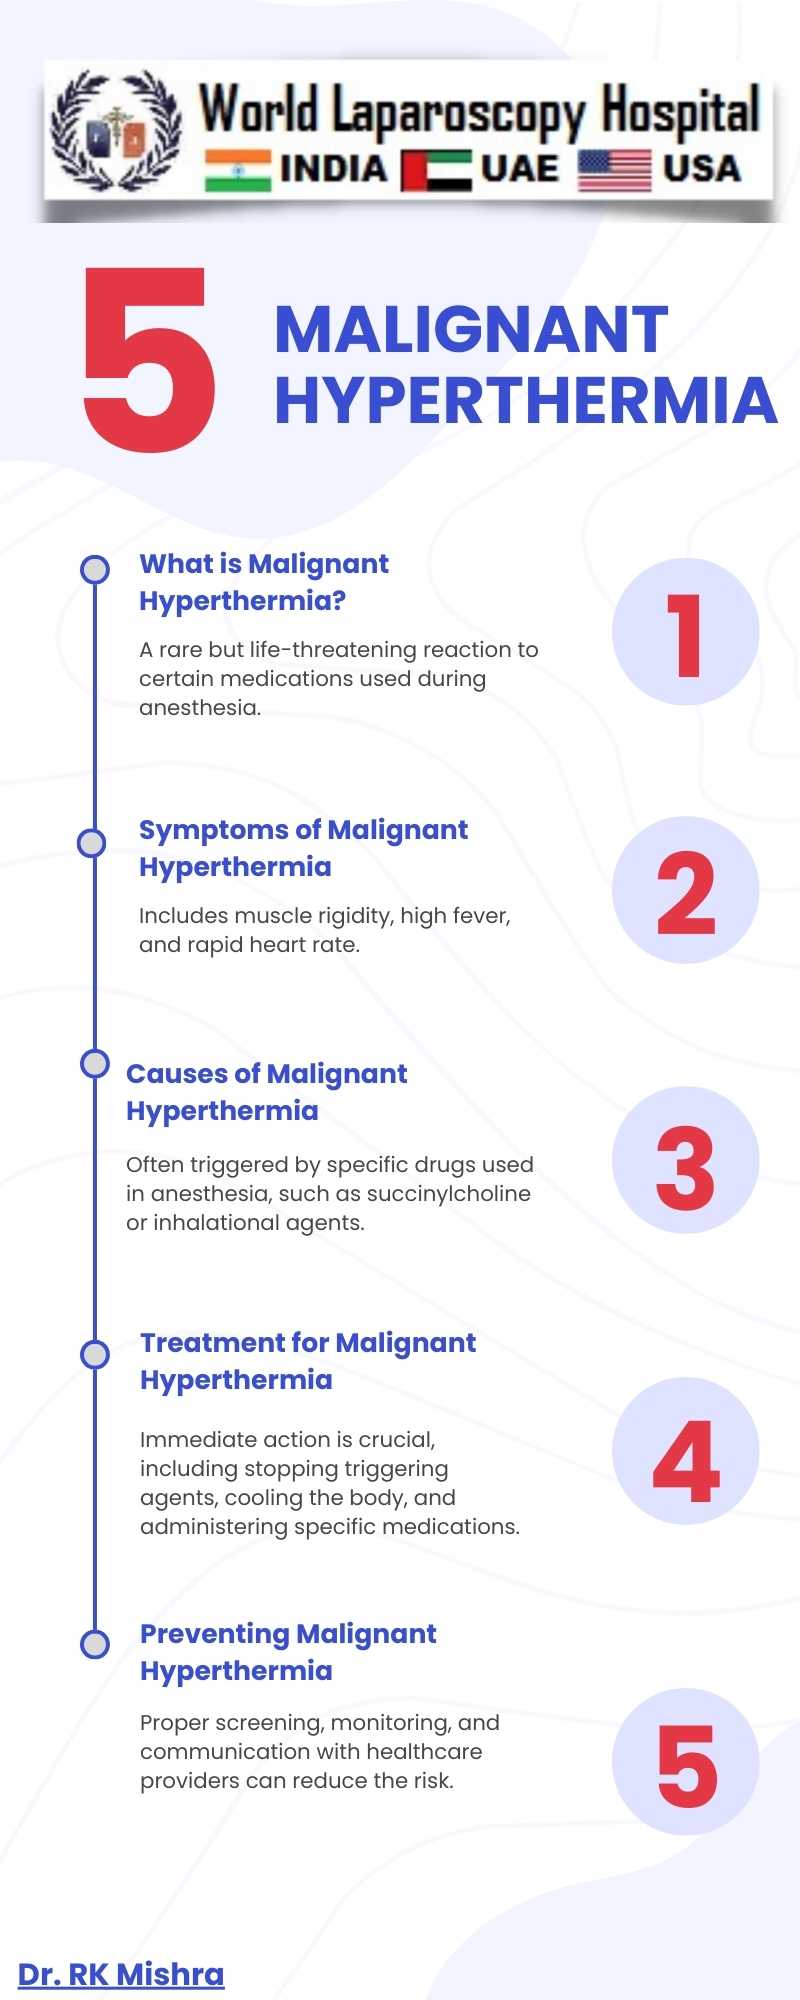 Malignant hyperthermia: A severe reaction to certain drugs used for anesthesia